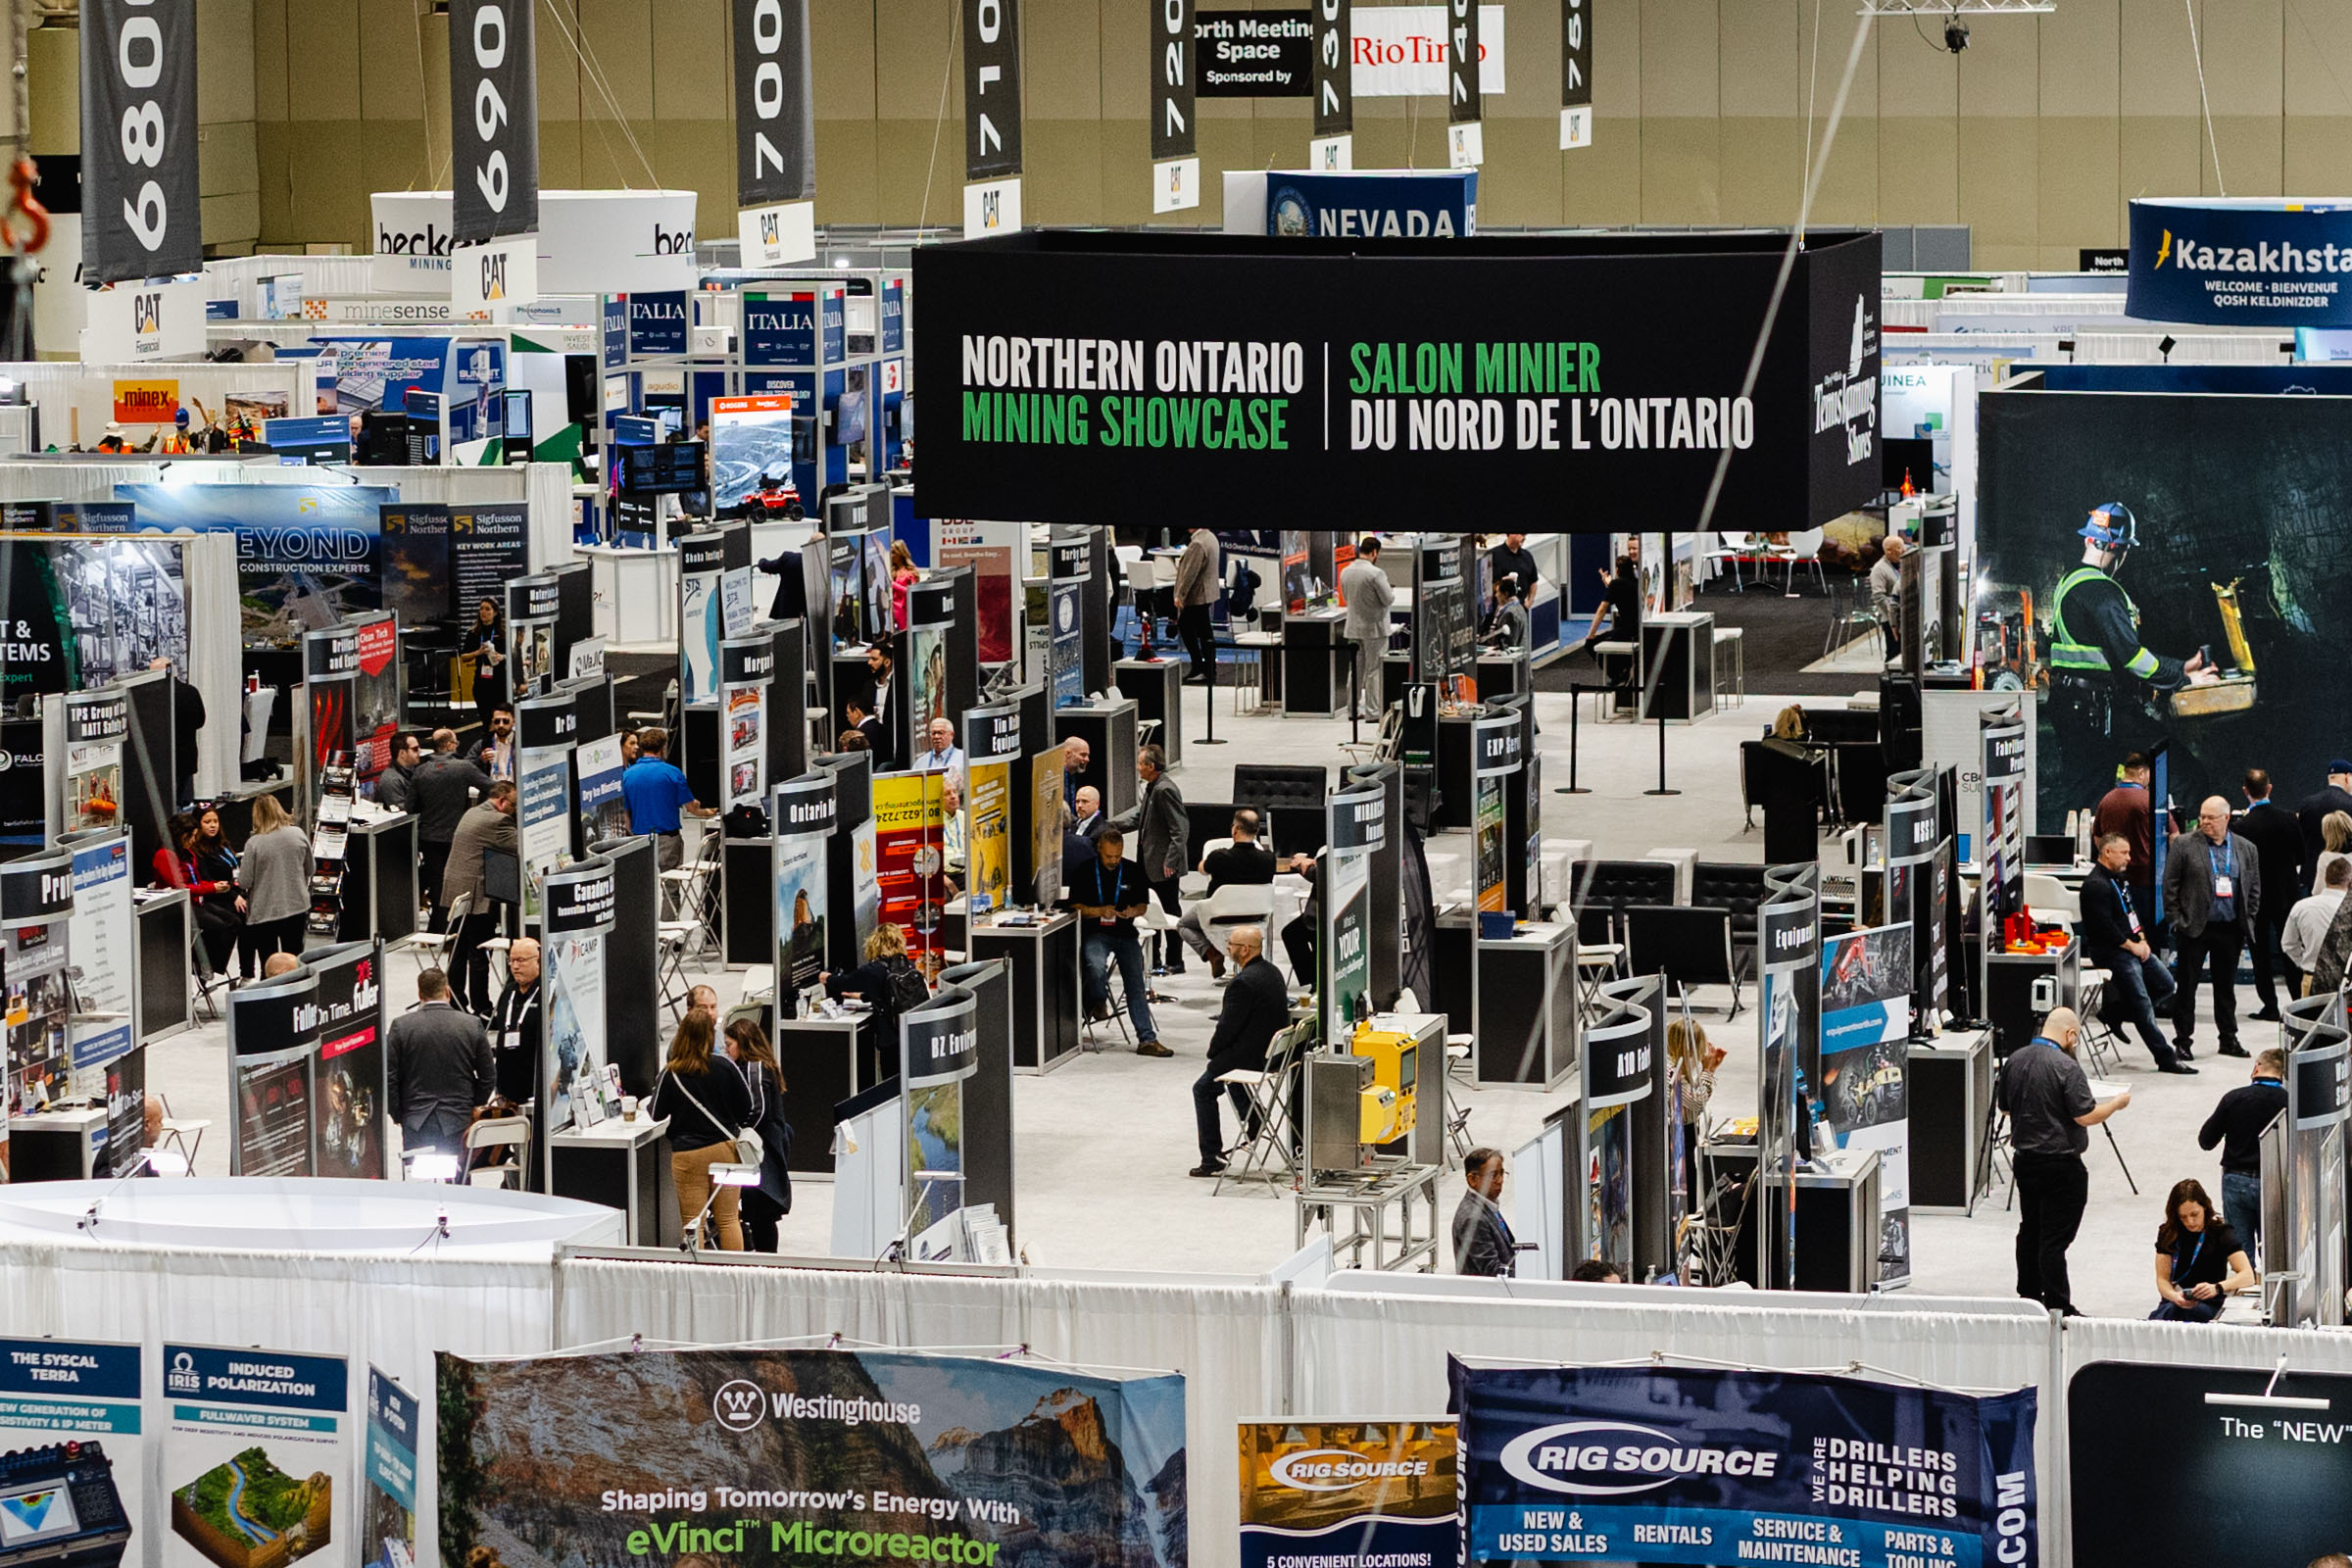 Exhibition hall at a mining industry event with various company booths, corporate photography, and attendees.